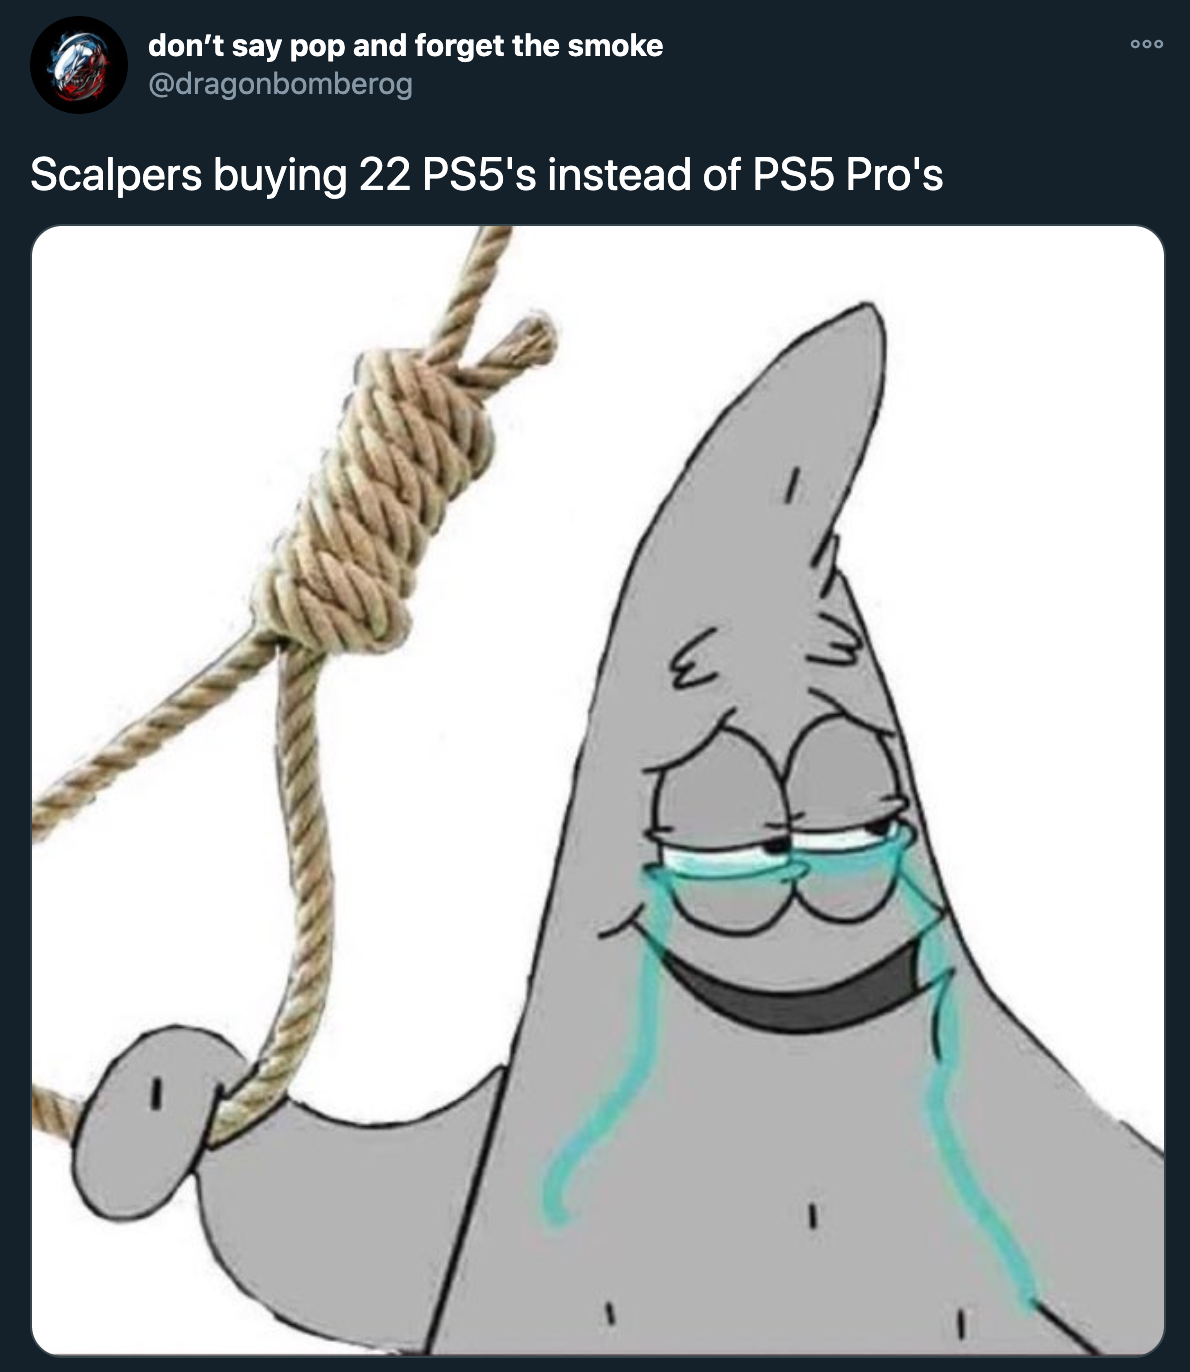 ps5 pro reactions - Scalpers buying 22 PS5's instead of PS5 Pro's